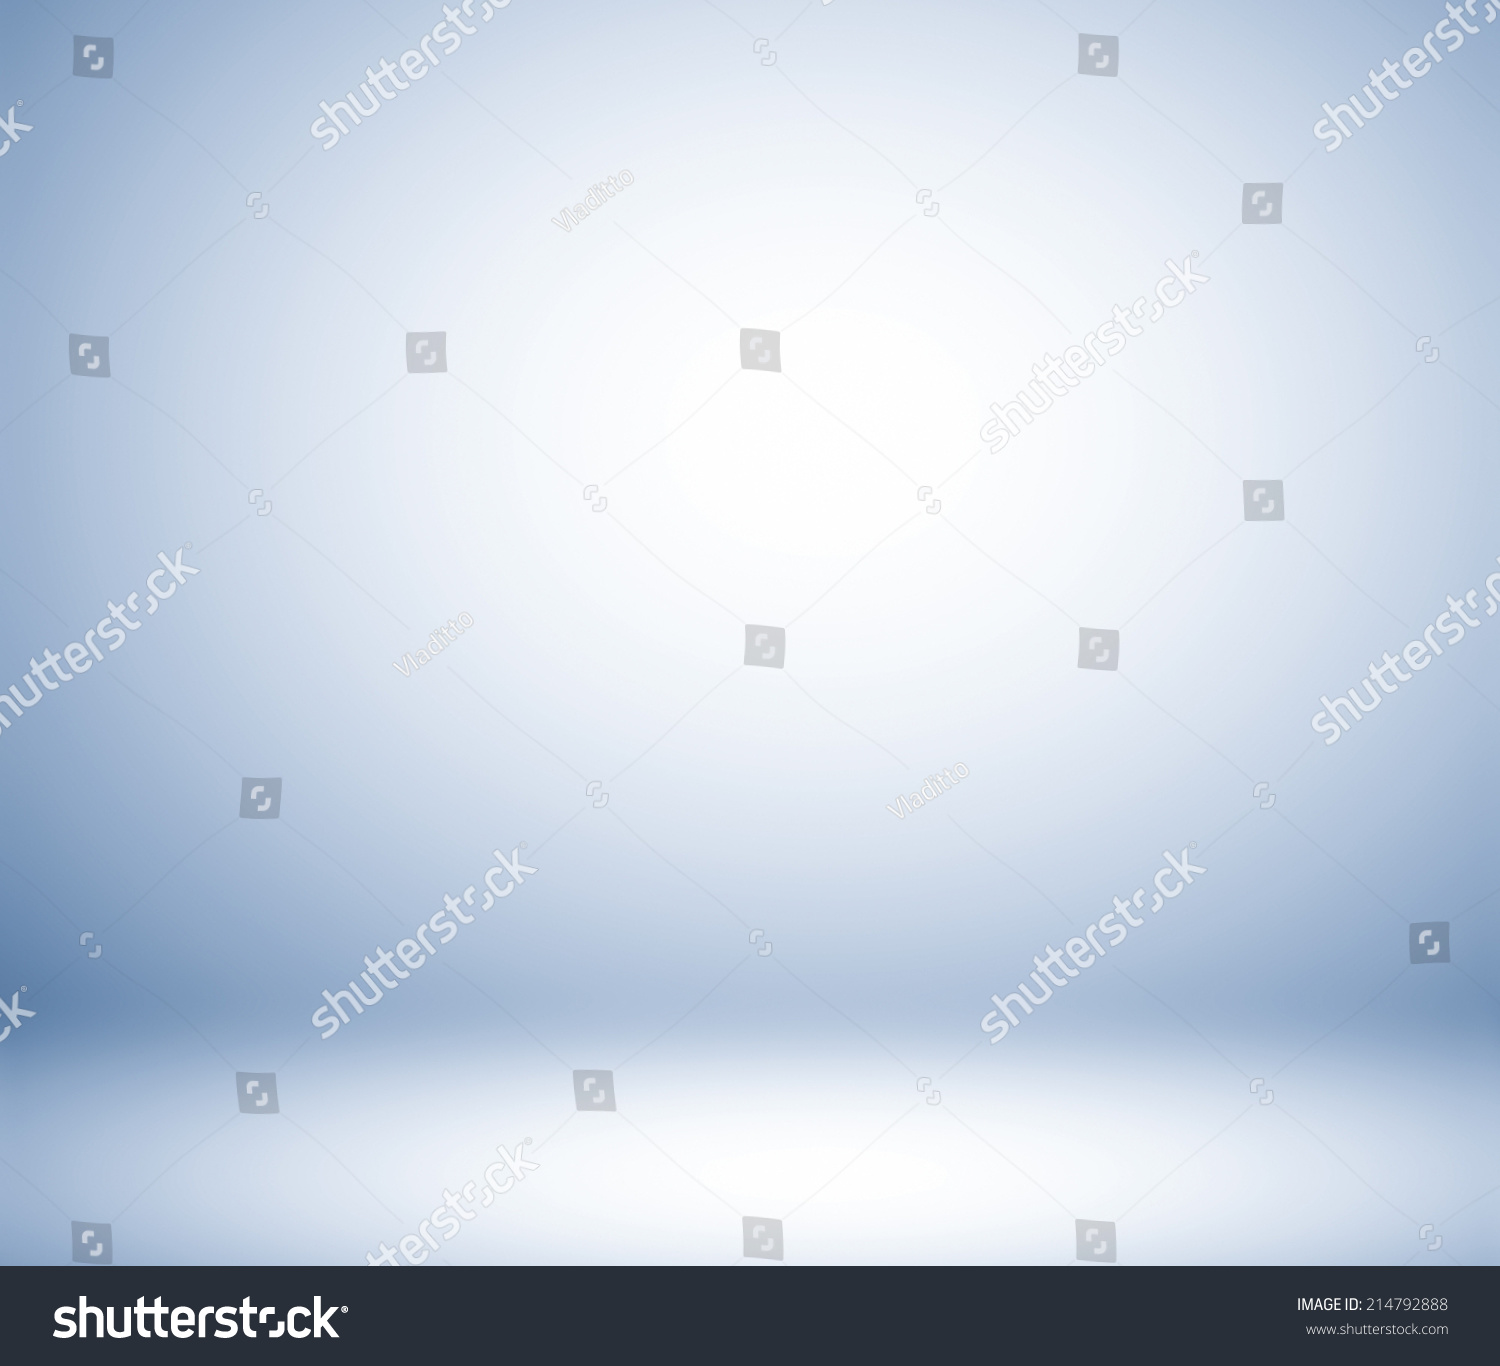 Abstract illustration background texture of beauty dark and light clear blue, cold gray, snowy white gradient flat wall and floor in empty spacious room interior #214792888